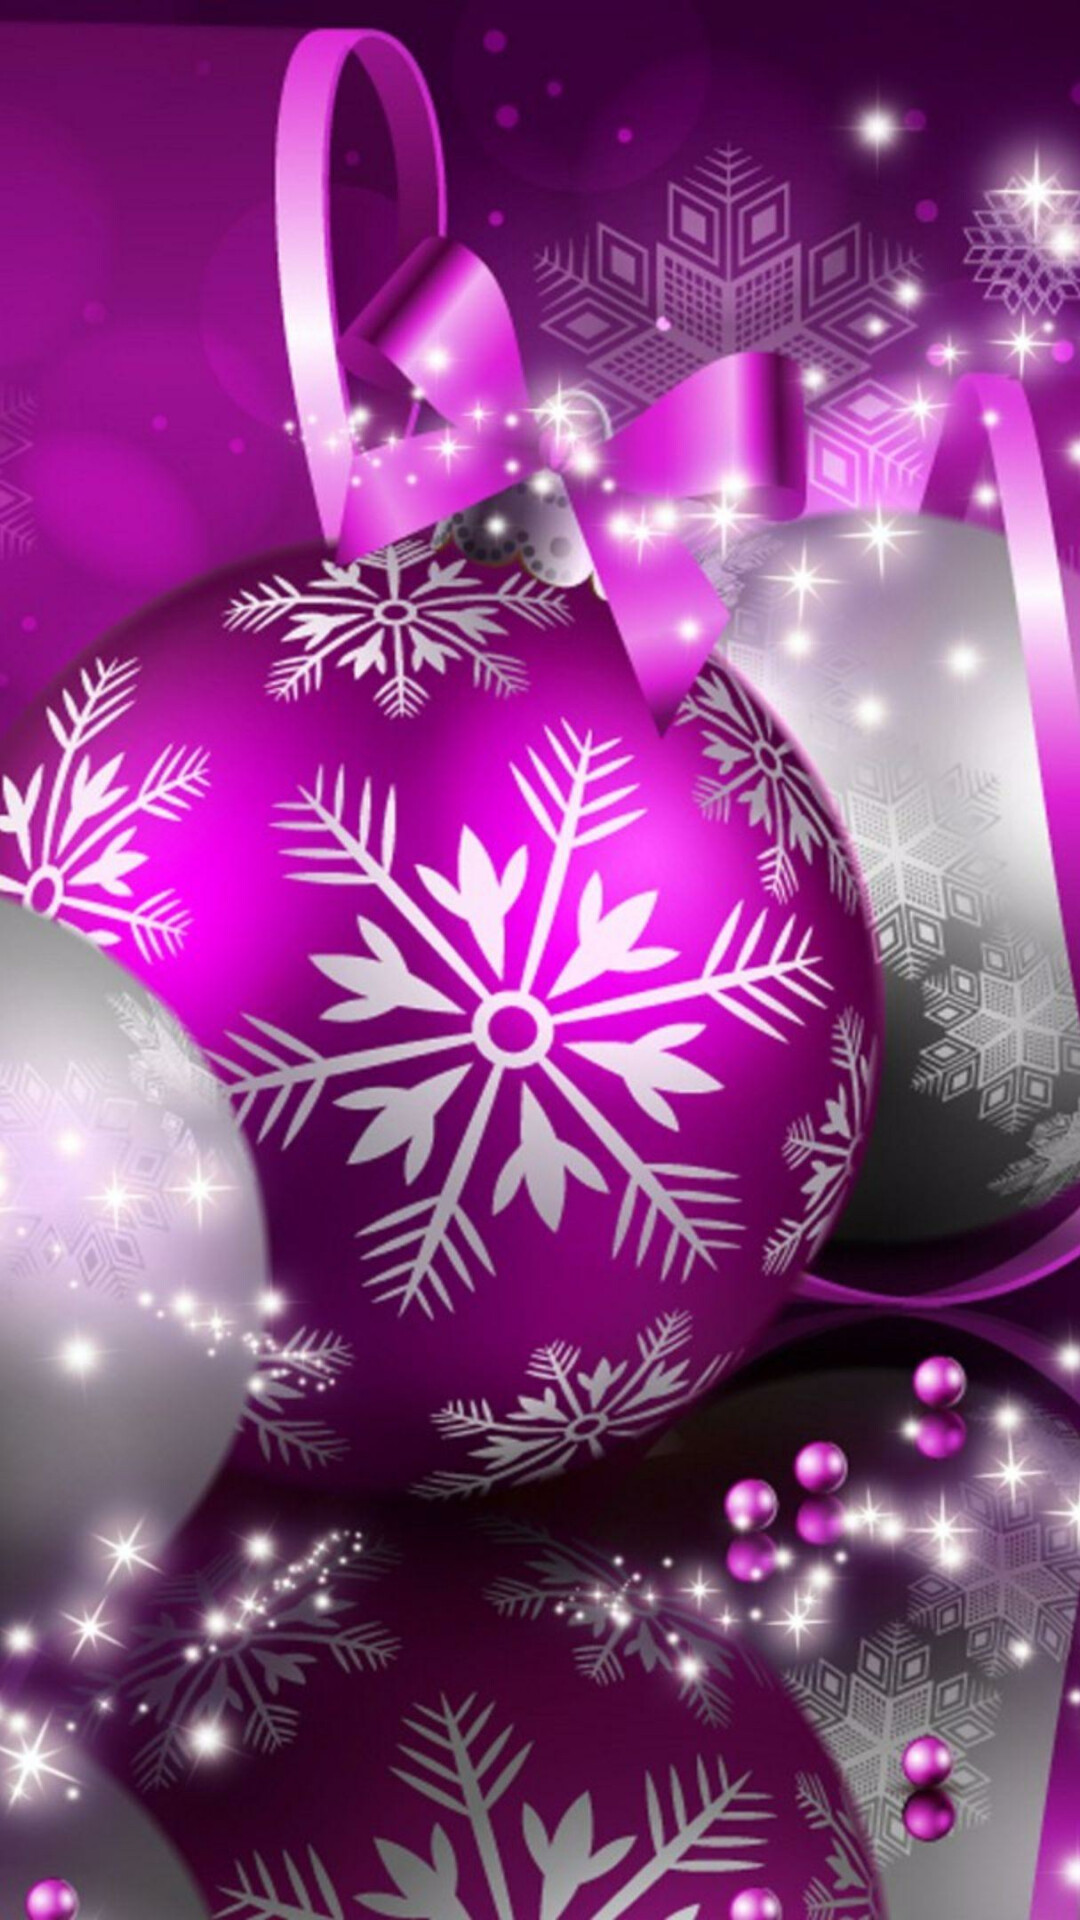 Decorations: Christmas ornament, Grace, beauty, and festivity. 1080x1920 Full HD Background.